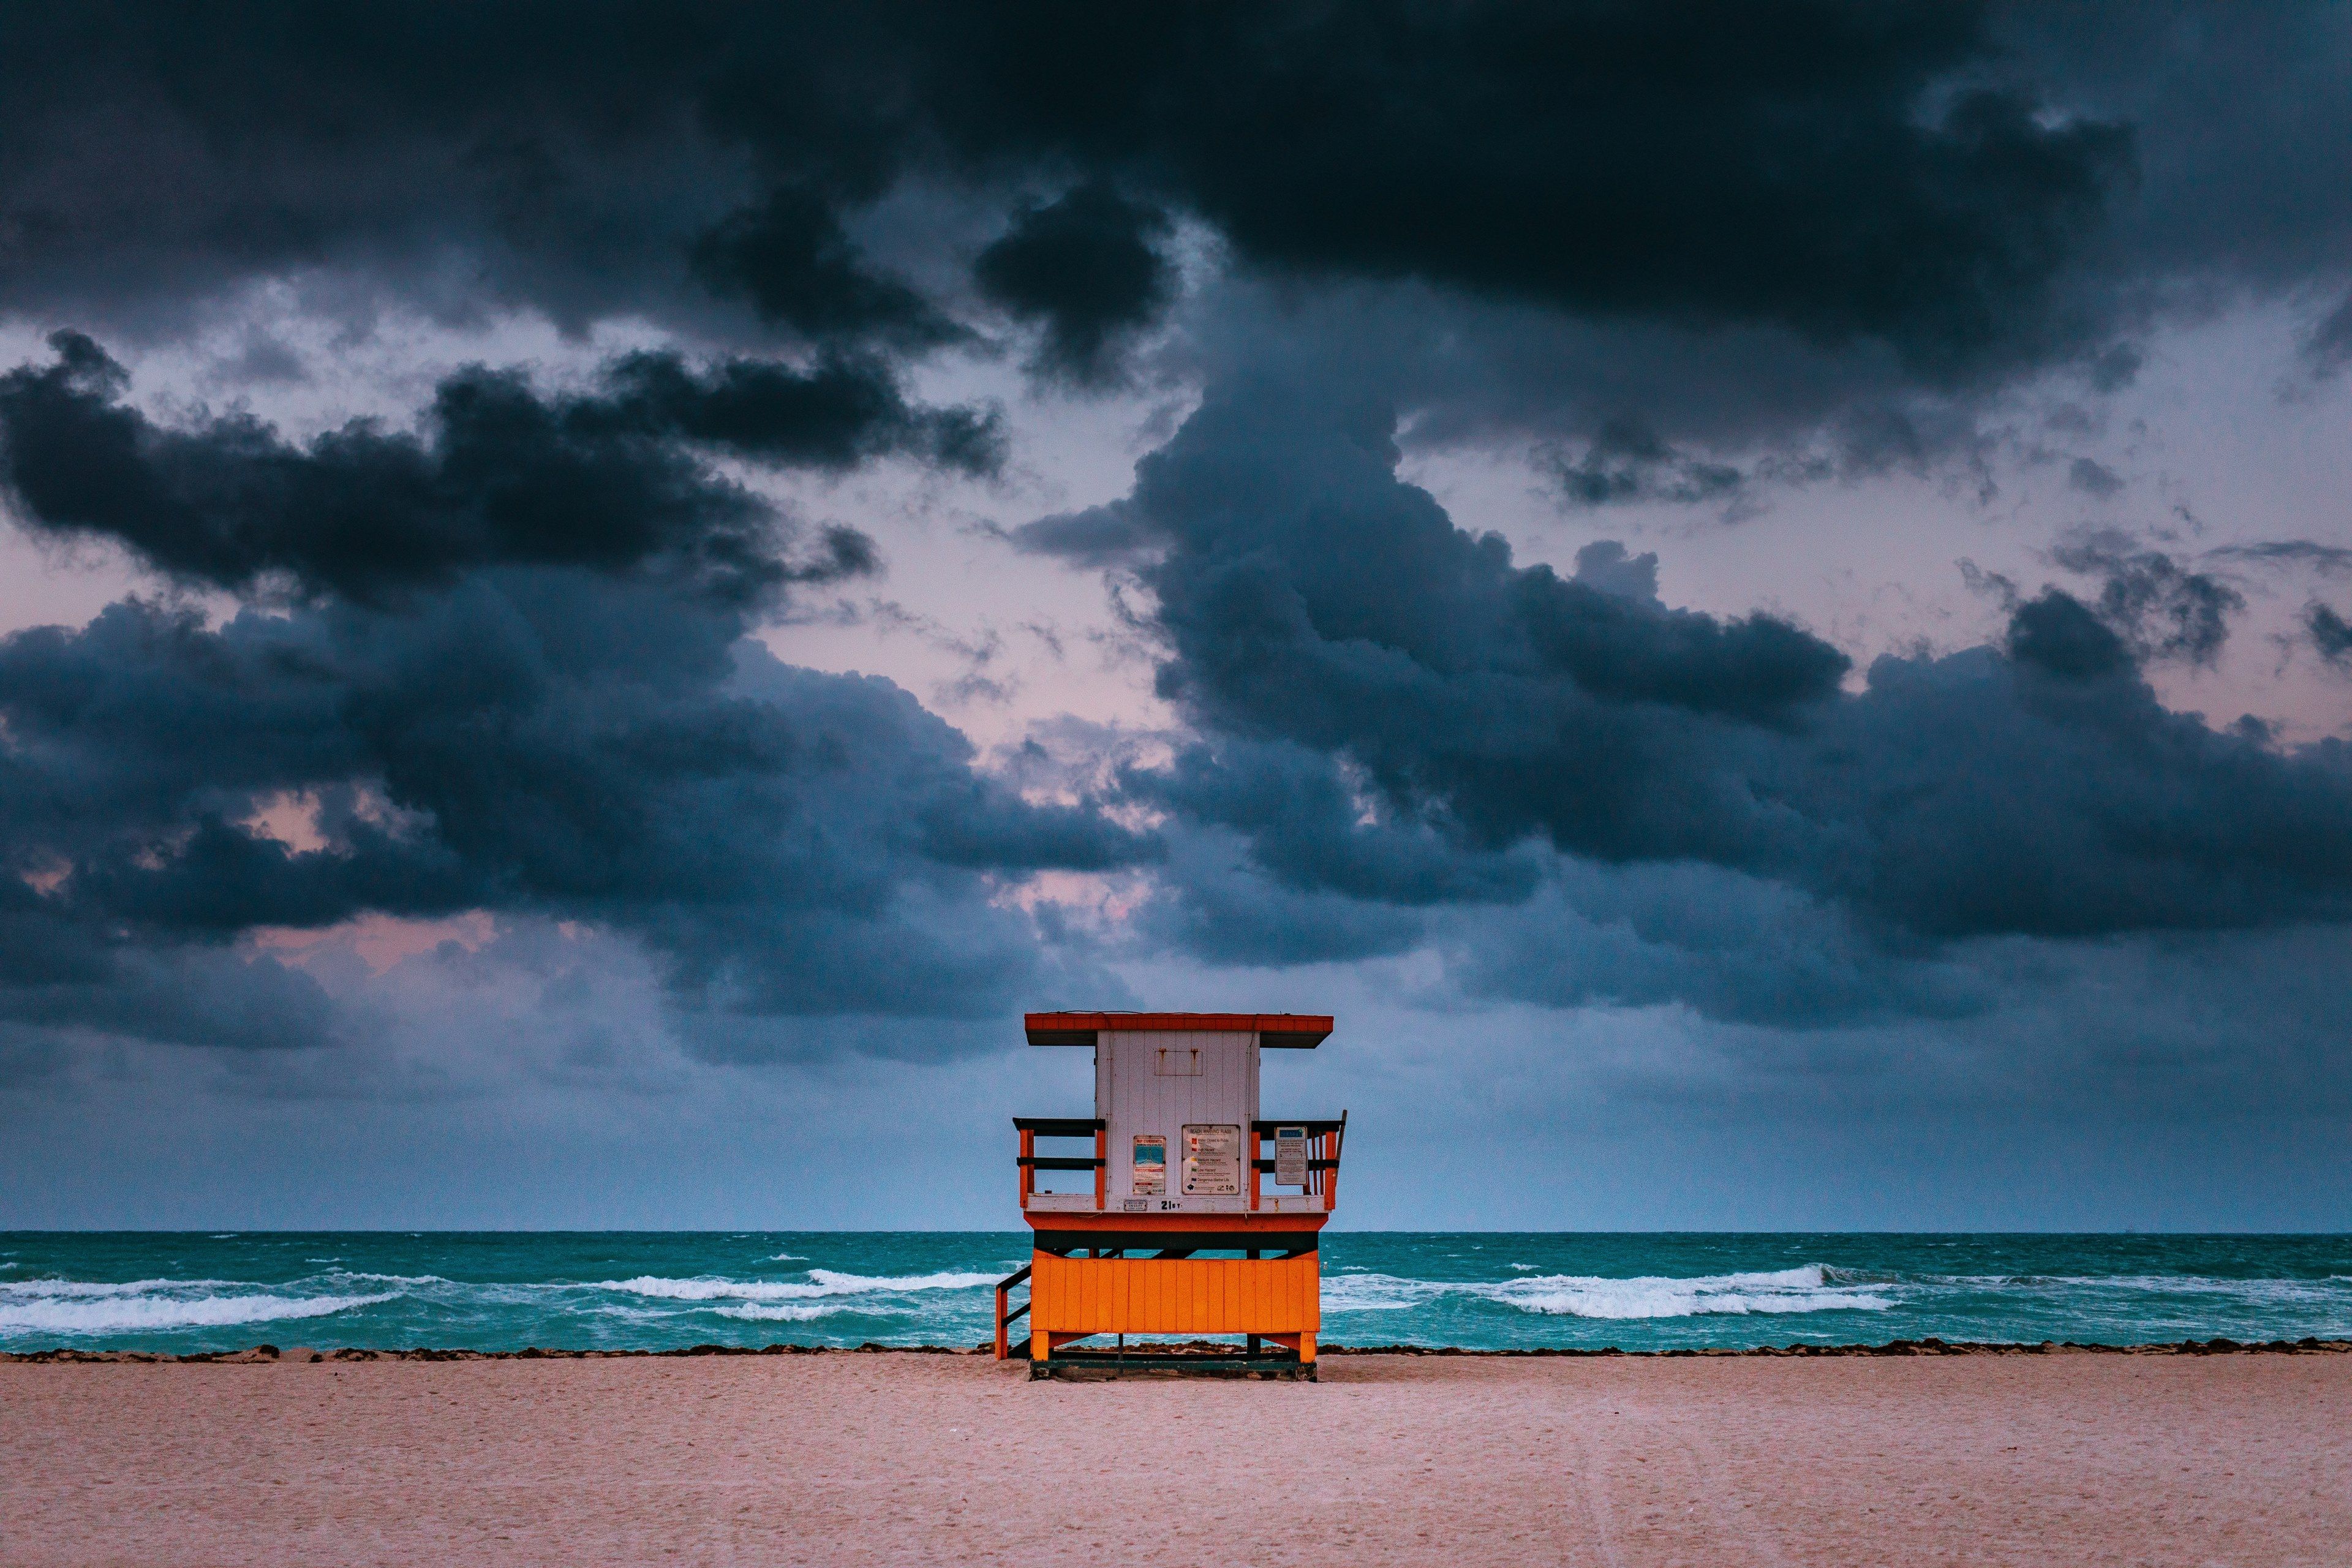 Wallpaper / lifeguard hut on the sand beach in miami on a day with storm clouds, lifeguarded 4k wallpaper